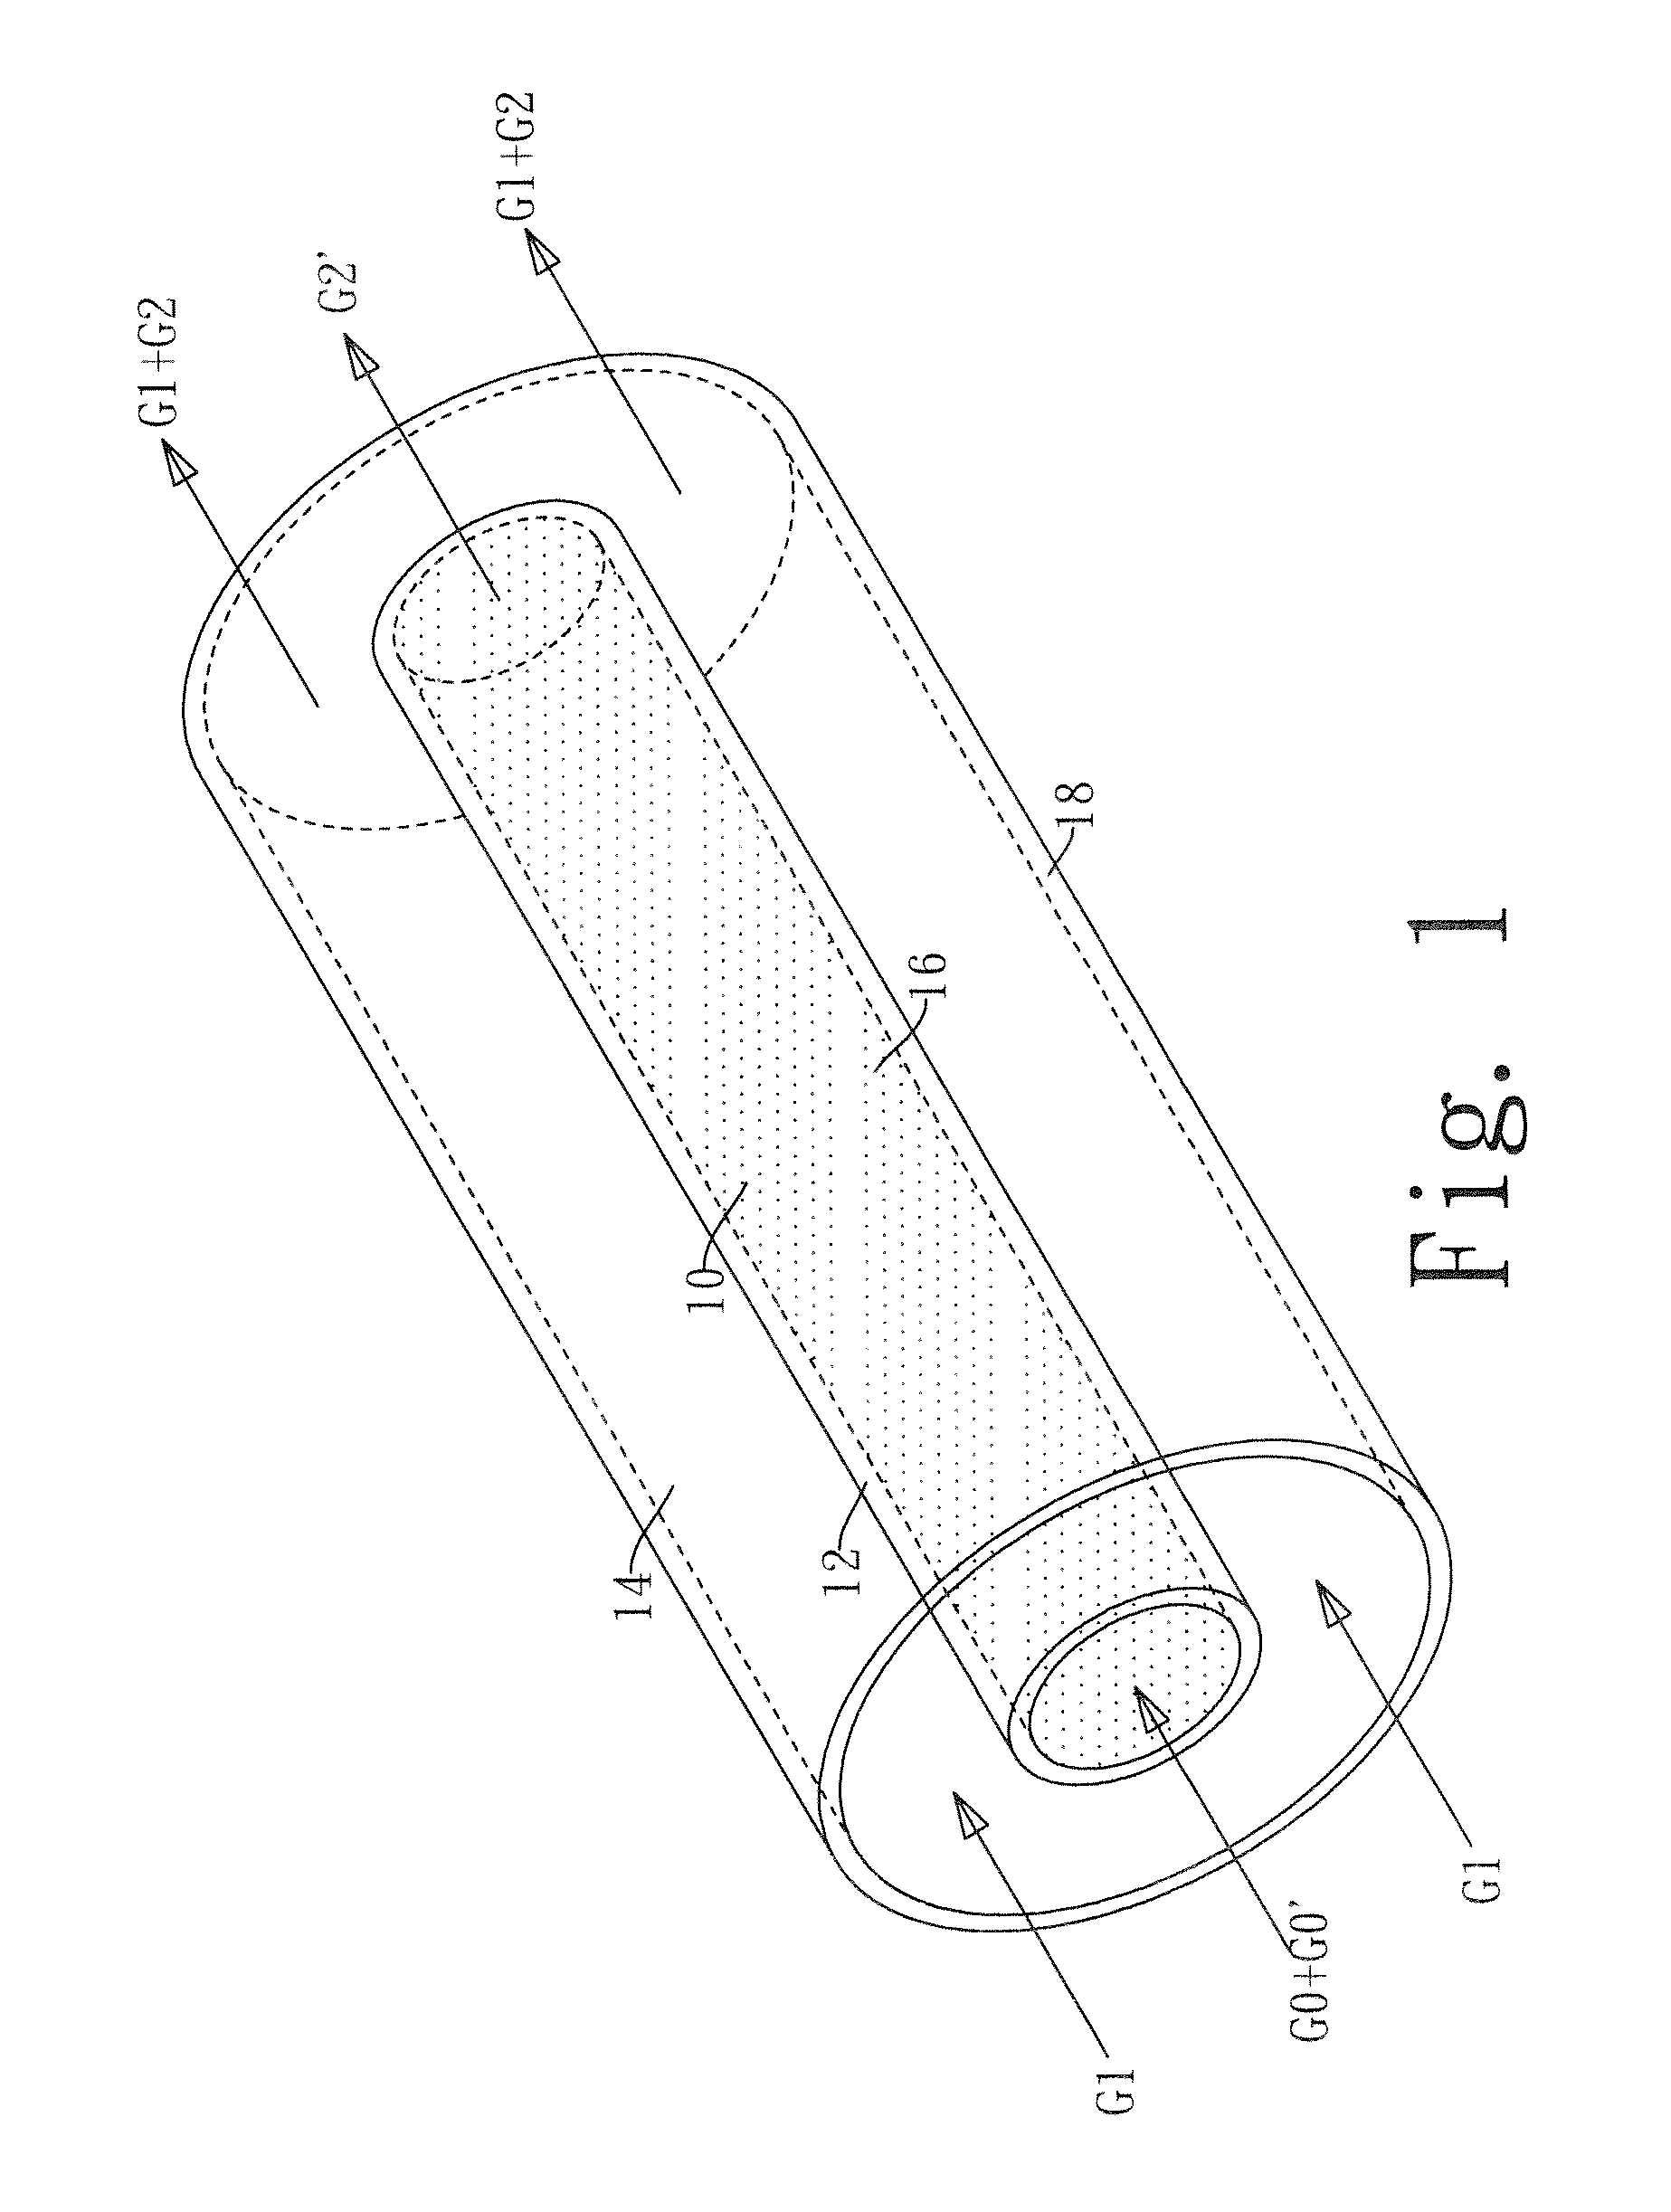 Membrane reactor with divergent-flow channel